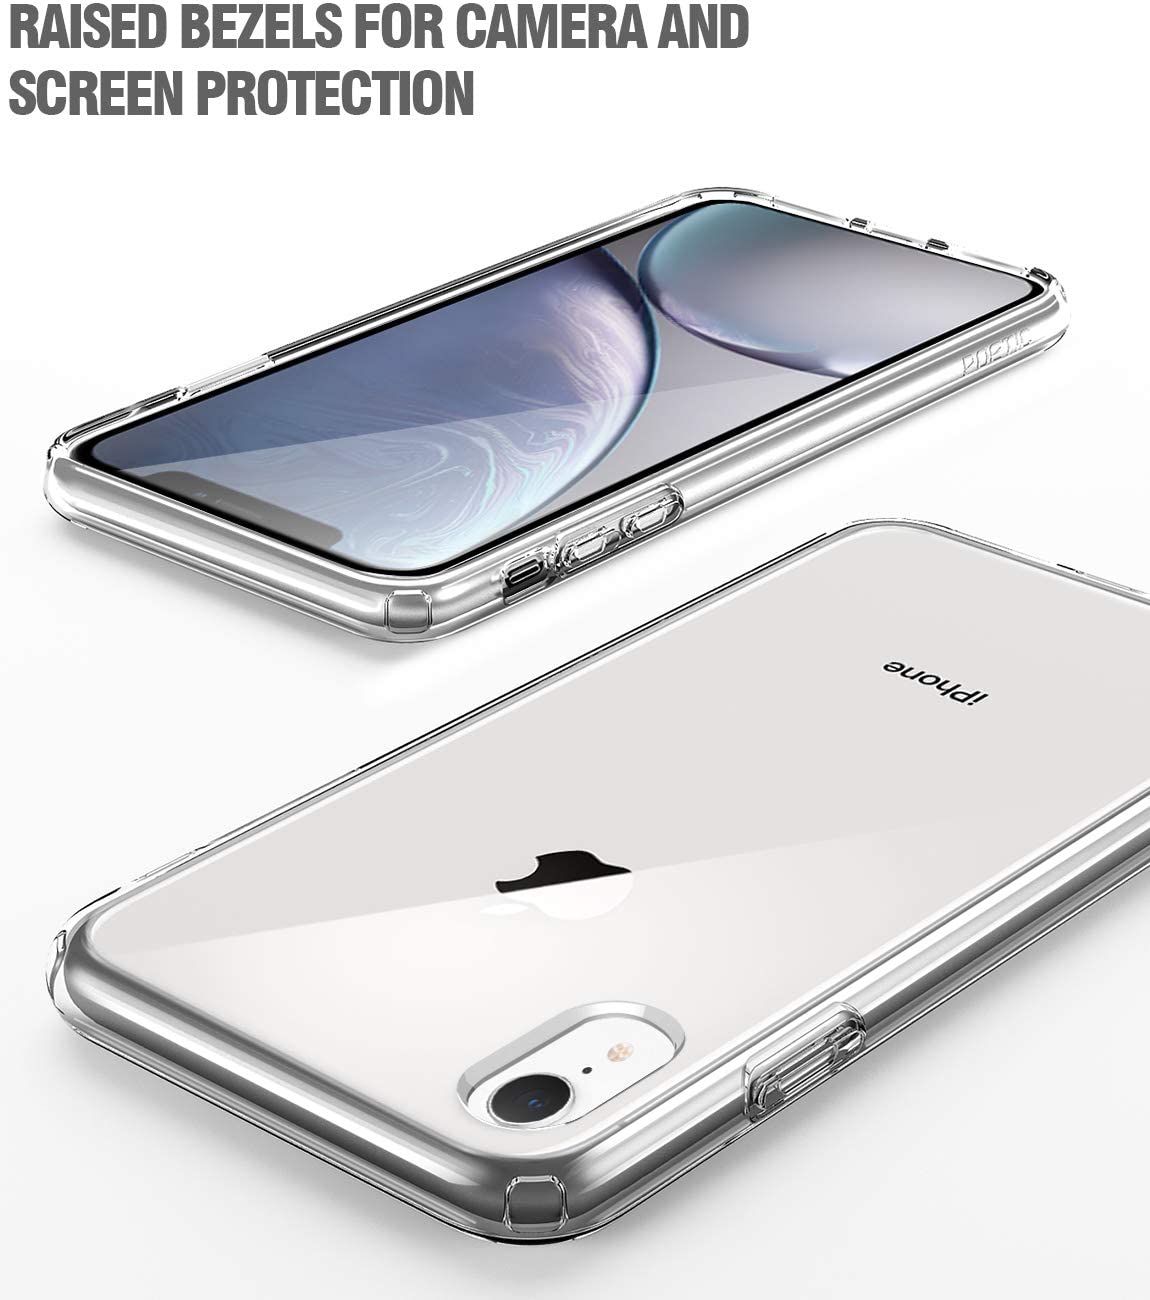 iPhone XR Clear Case, Poetic Lumos Flexible Soft Transparent Ultra-Thin Impact Resistant TPU Case for Apple iPhone XR 6.1" LCD Display - Crystal Clear - e4cents